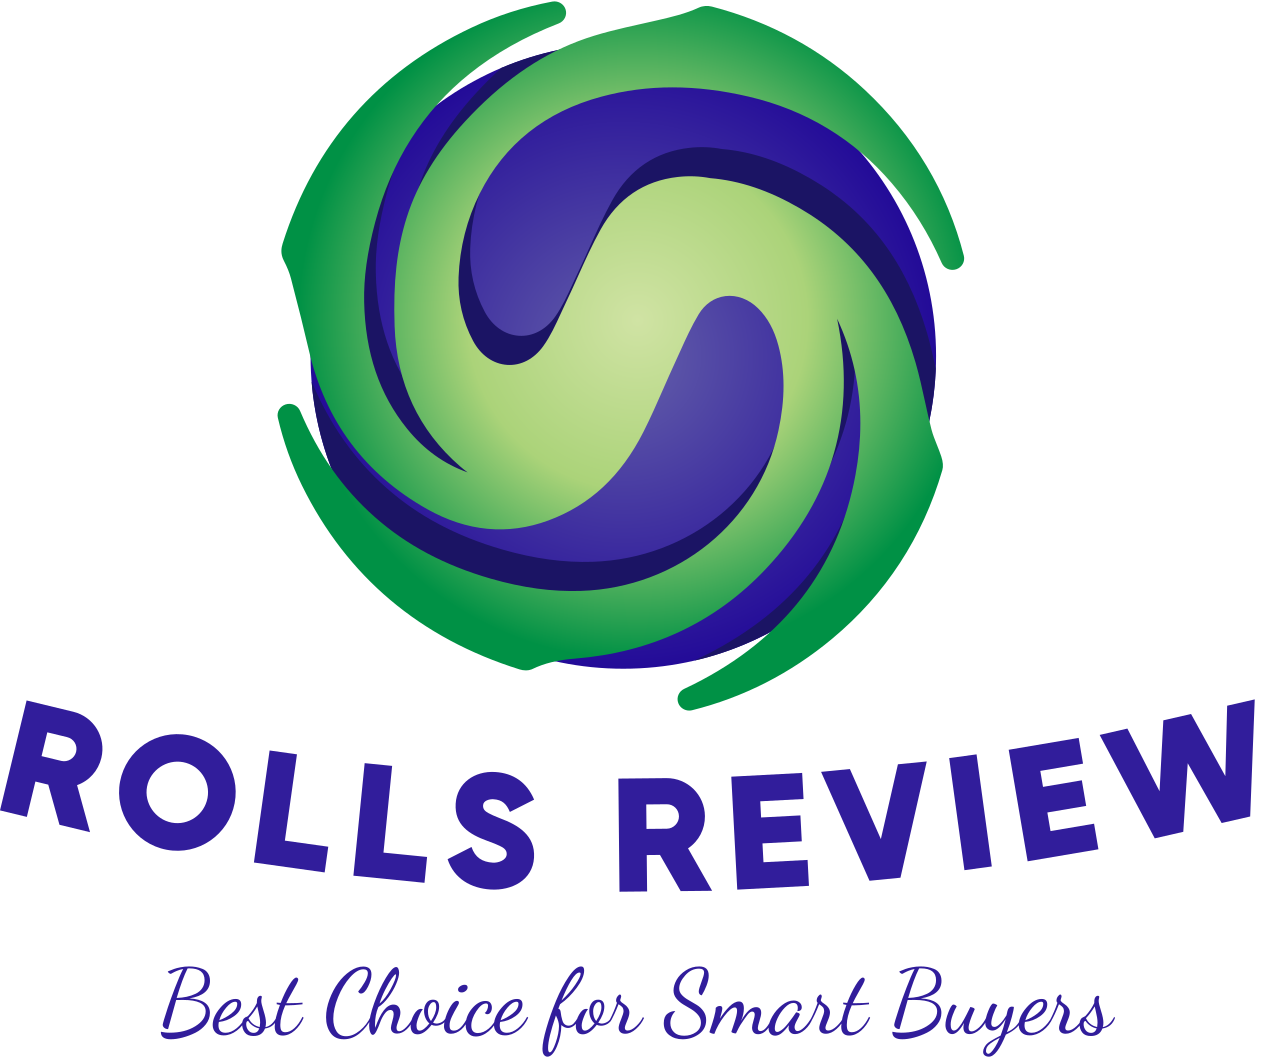 Rolls Review's logo